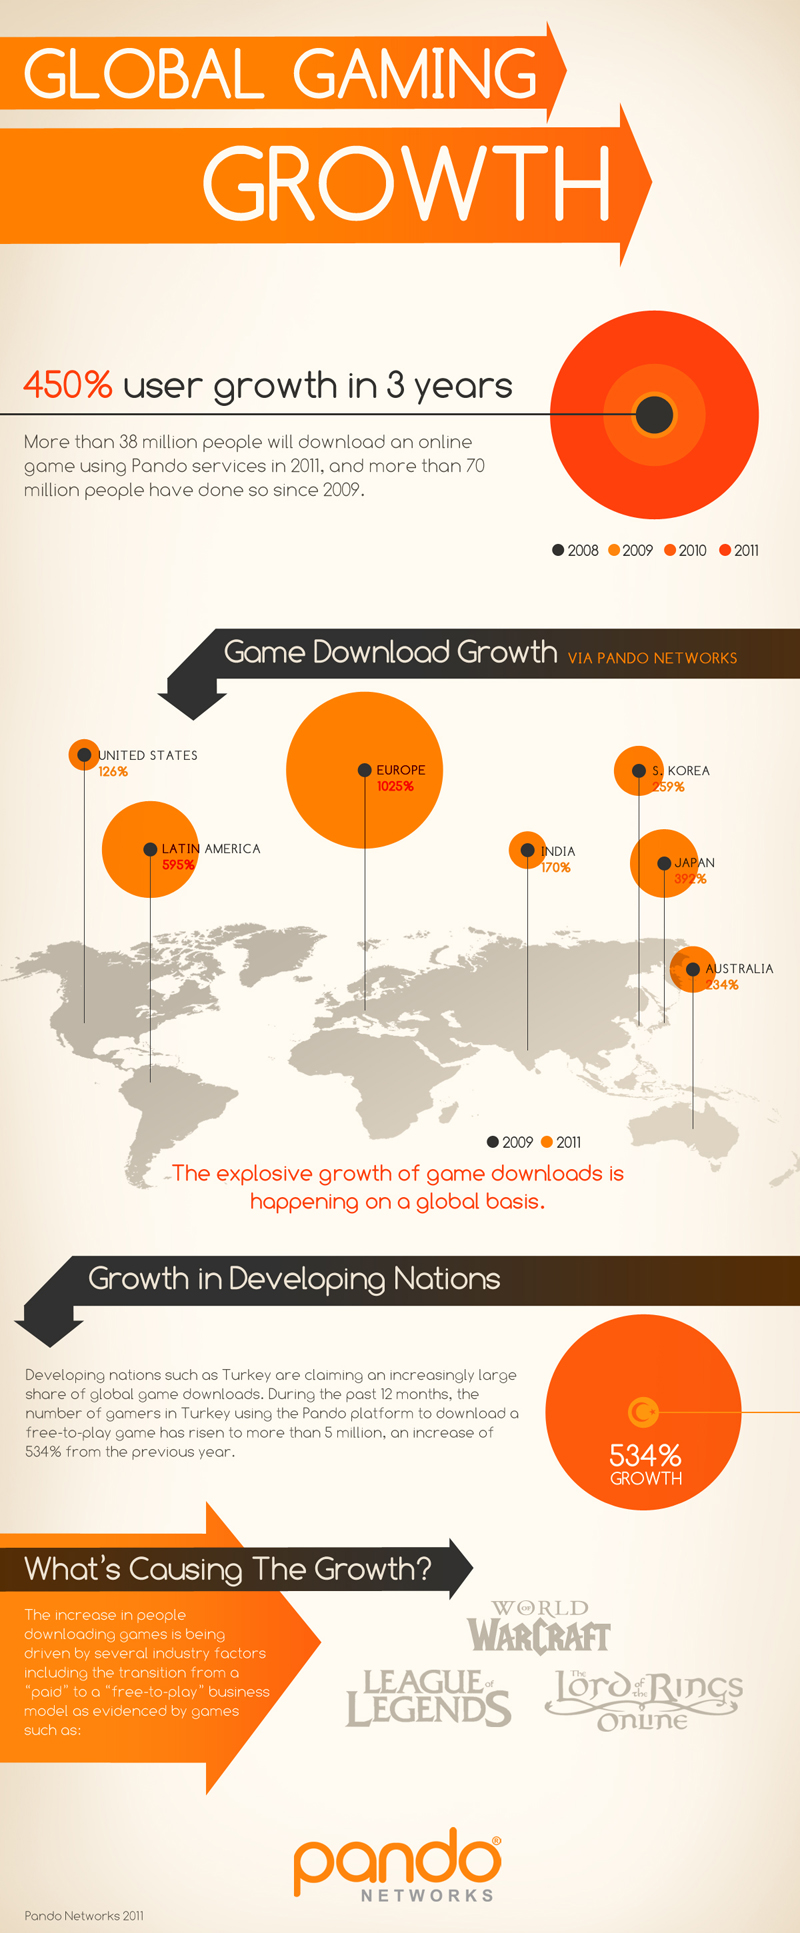 Global Gaming Growth